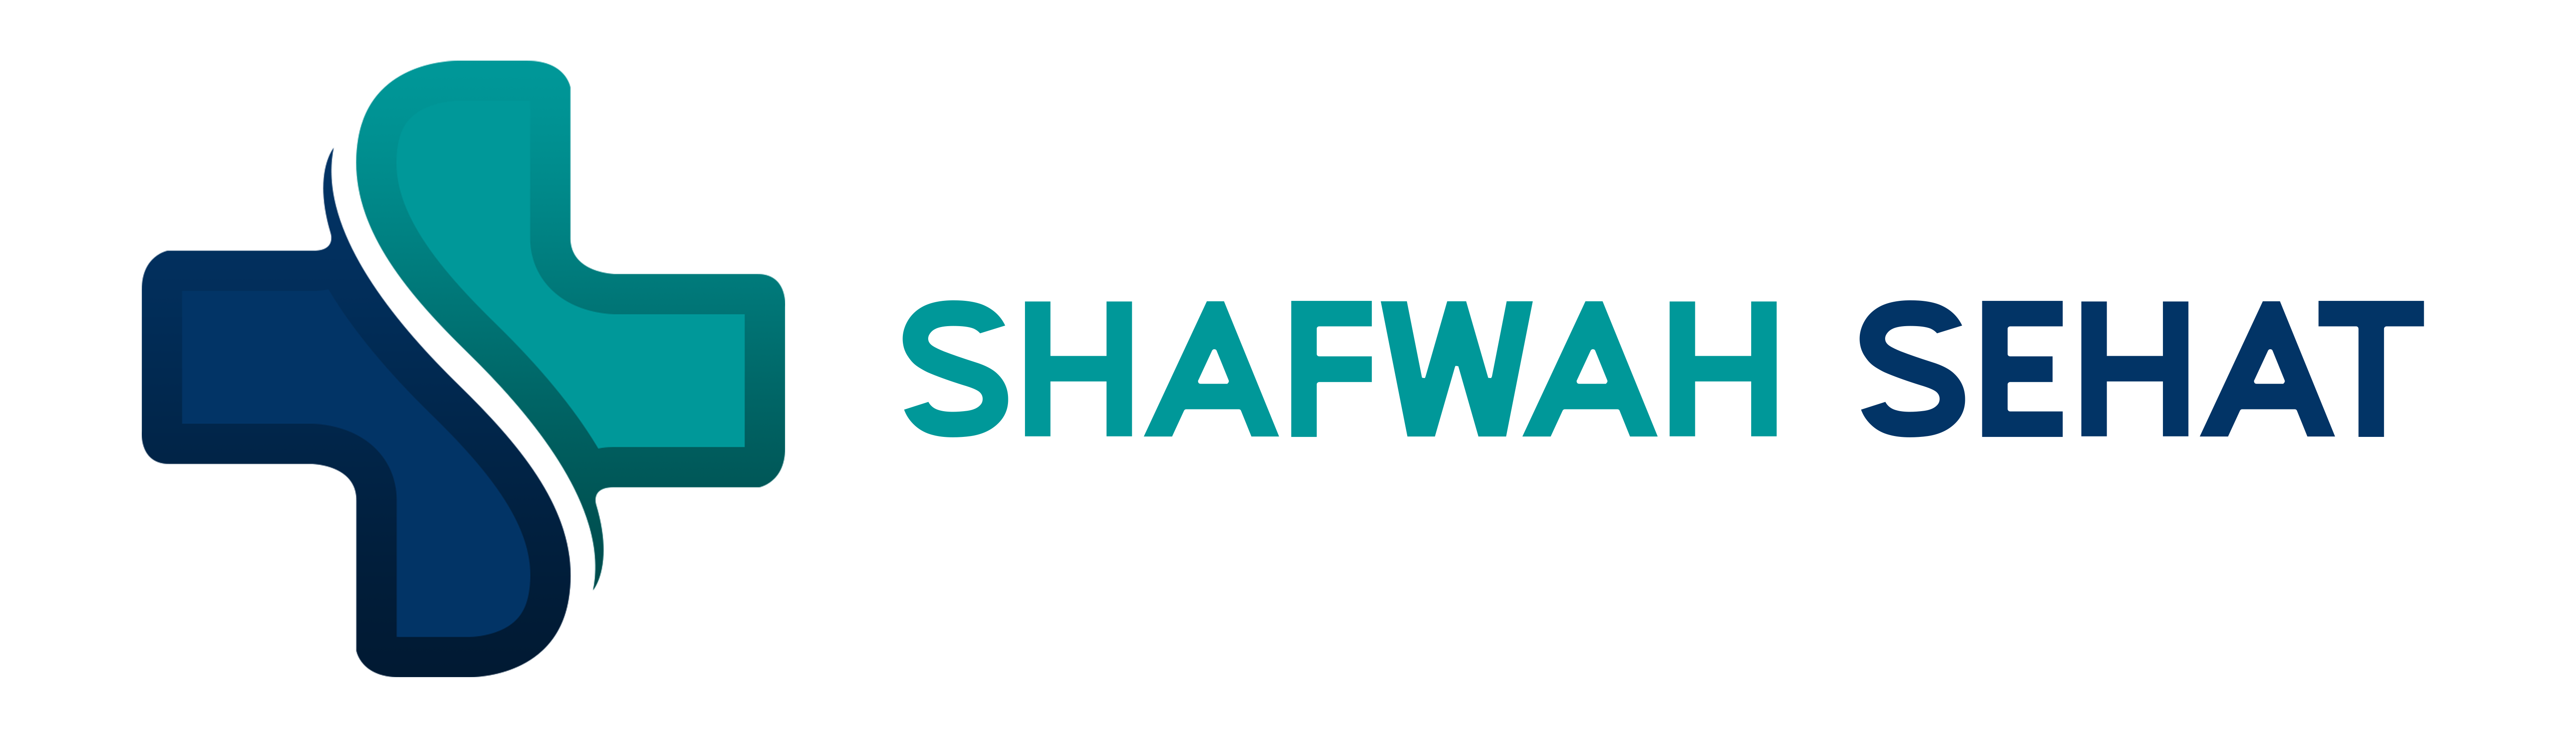 Shafwah Sehat